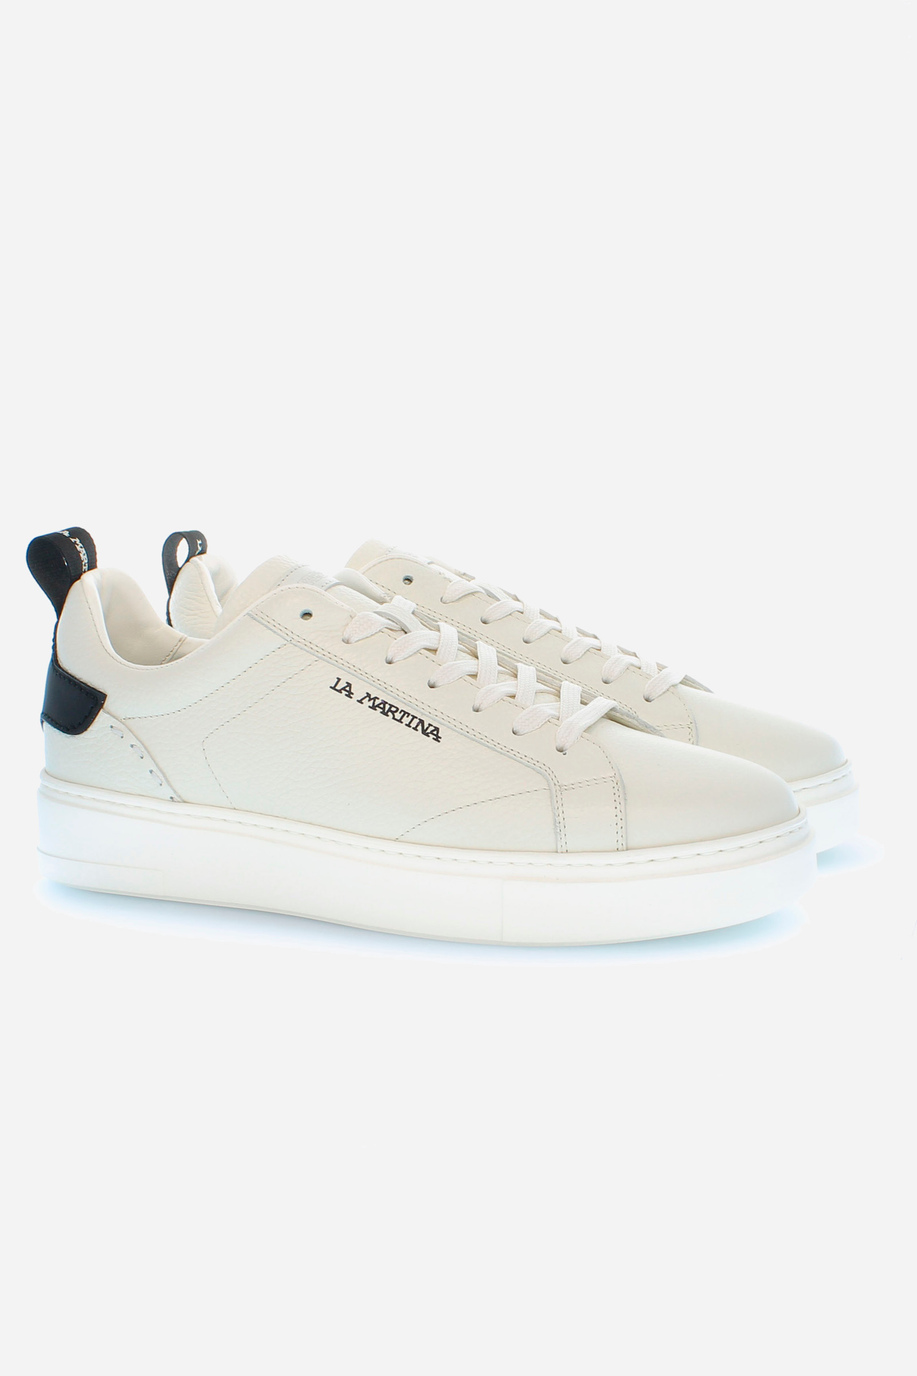 Men soft tumbled leather trainers - Sneakers | La Martina - Official Online Shop